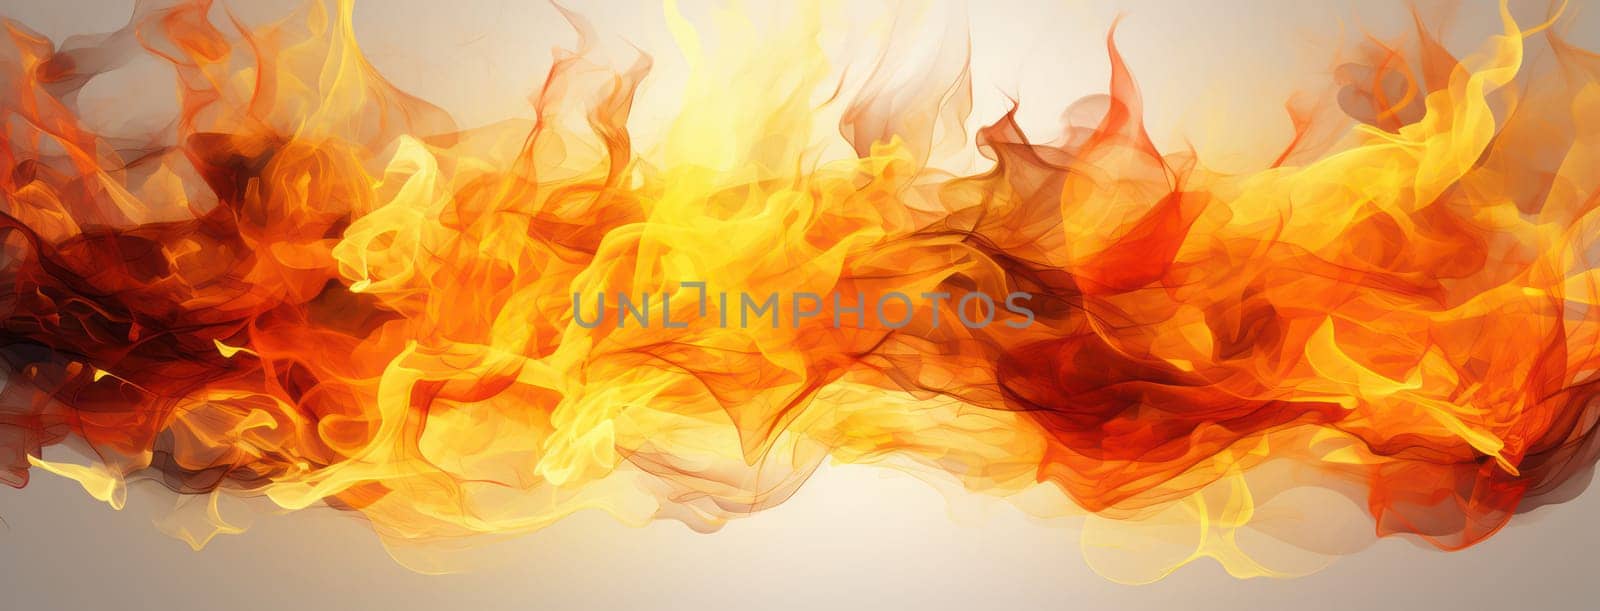 Blazing Flames: A Fiery Dance of Red and Yellow in the Abstract Heat by Vichizh